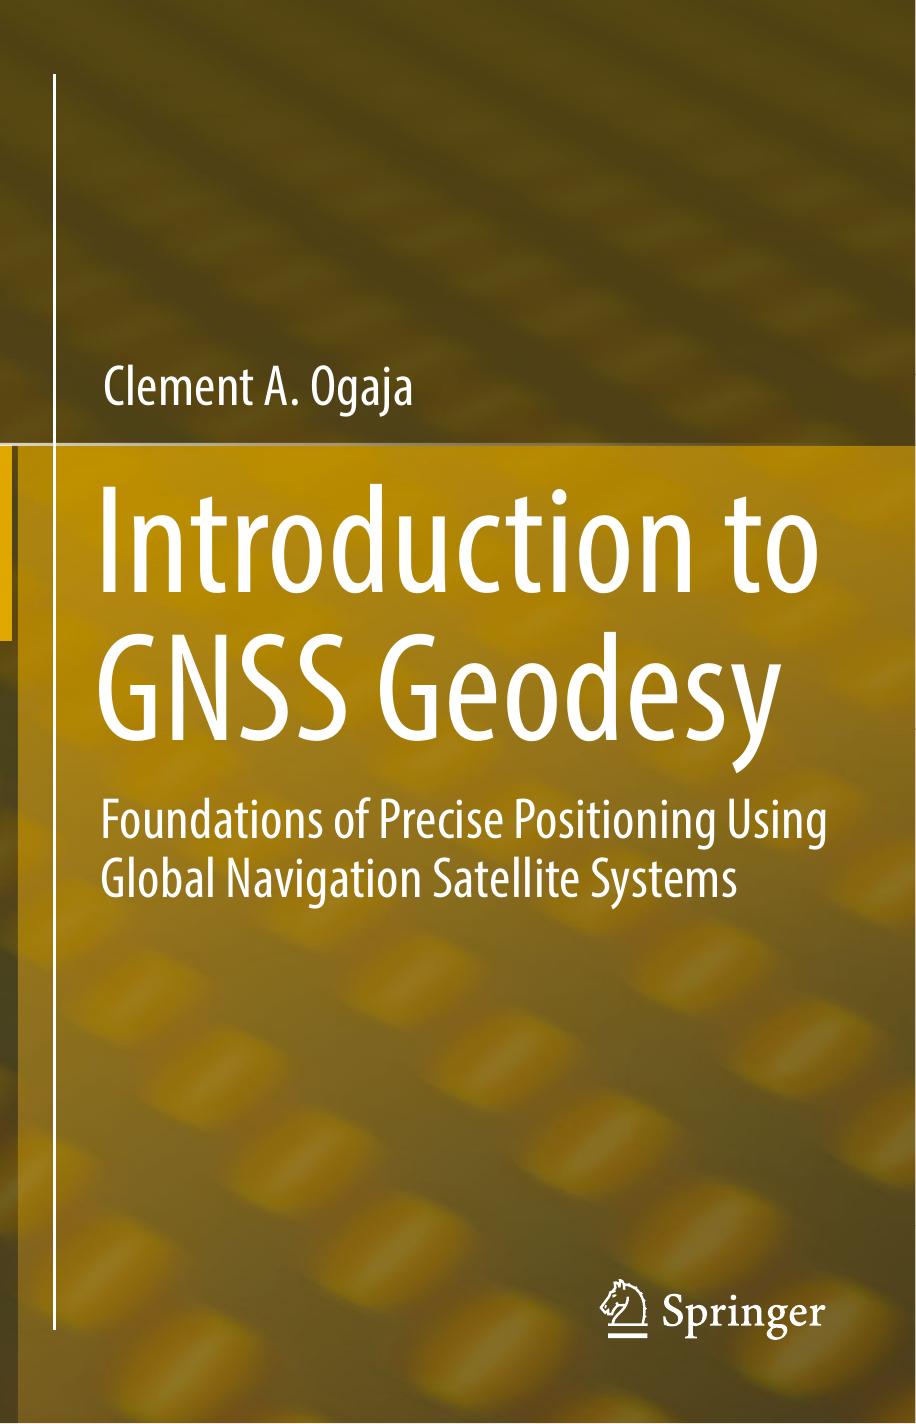 INTRODUCTION TO GNSS GEODESY  foundations of precise positioning and geoinformatics.-SPRINGER NATURE (2022)